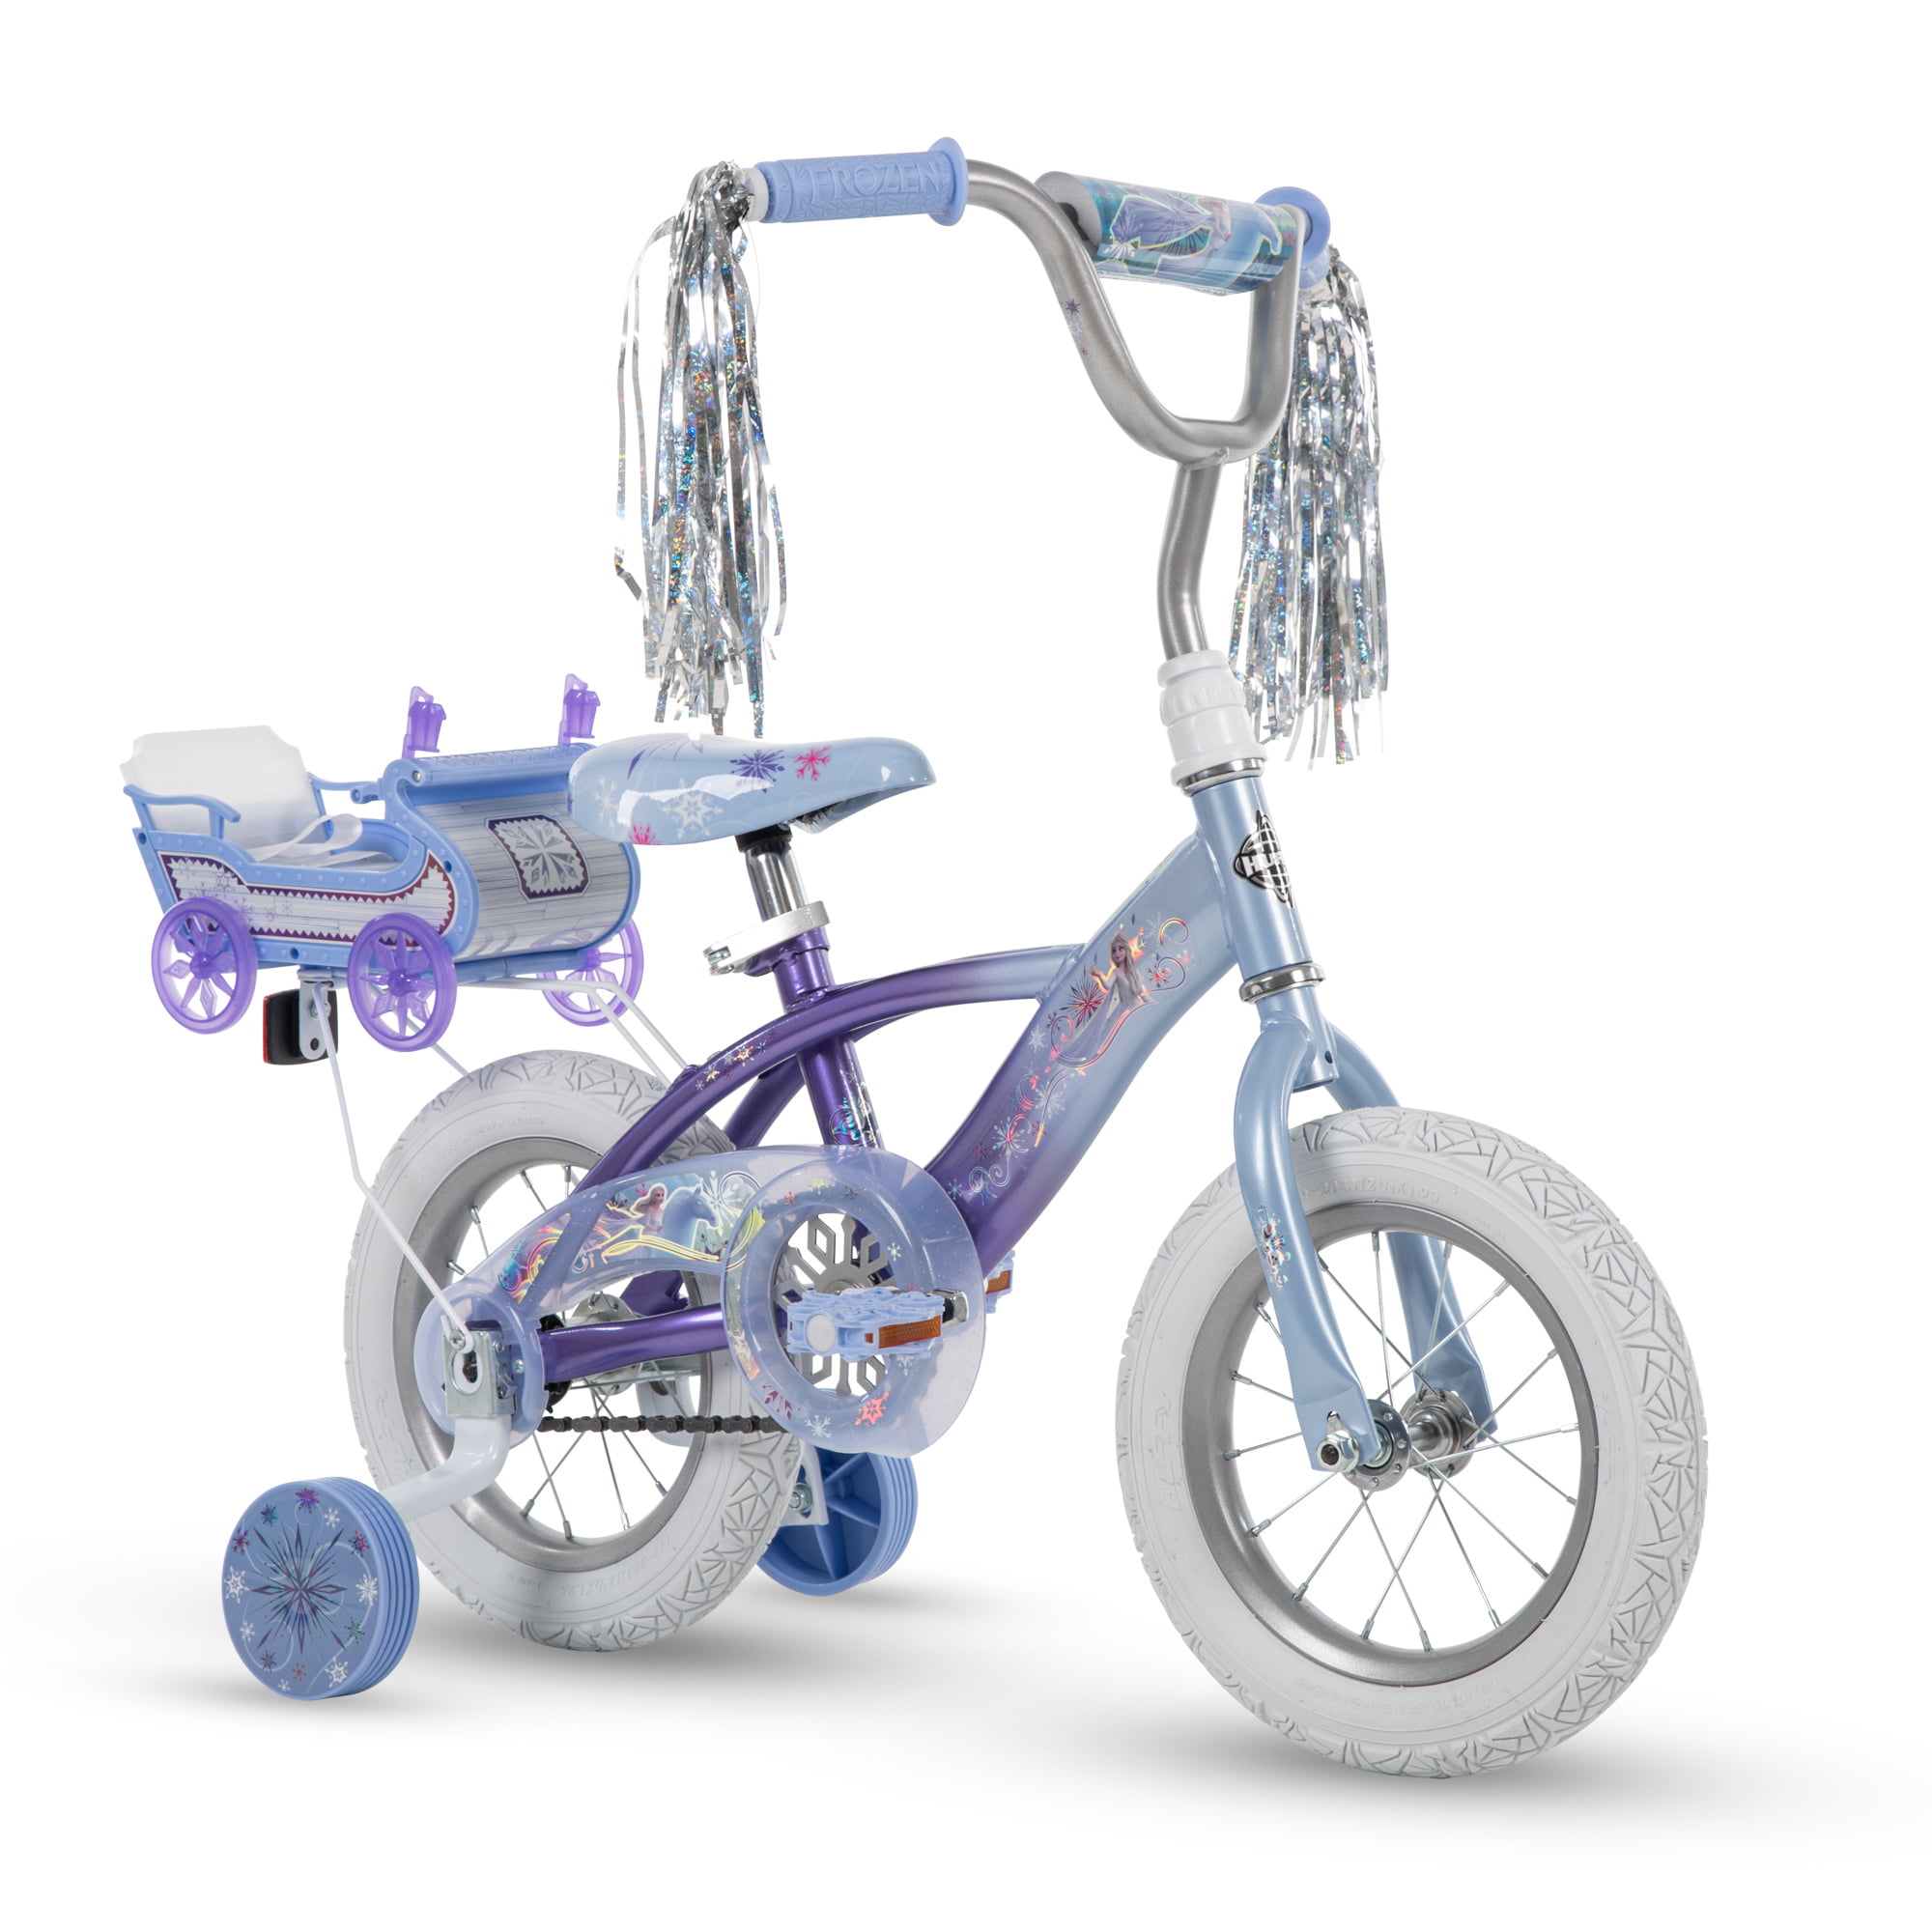 Details about   Huffy New 12 Inch Girls Frozen Bike with Sleigh Blue 